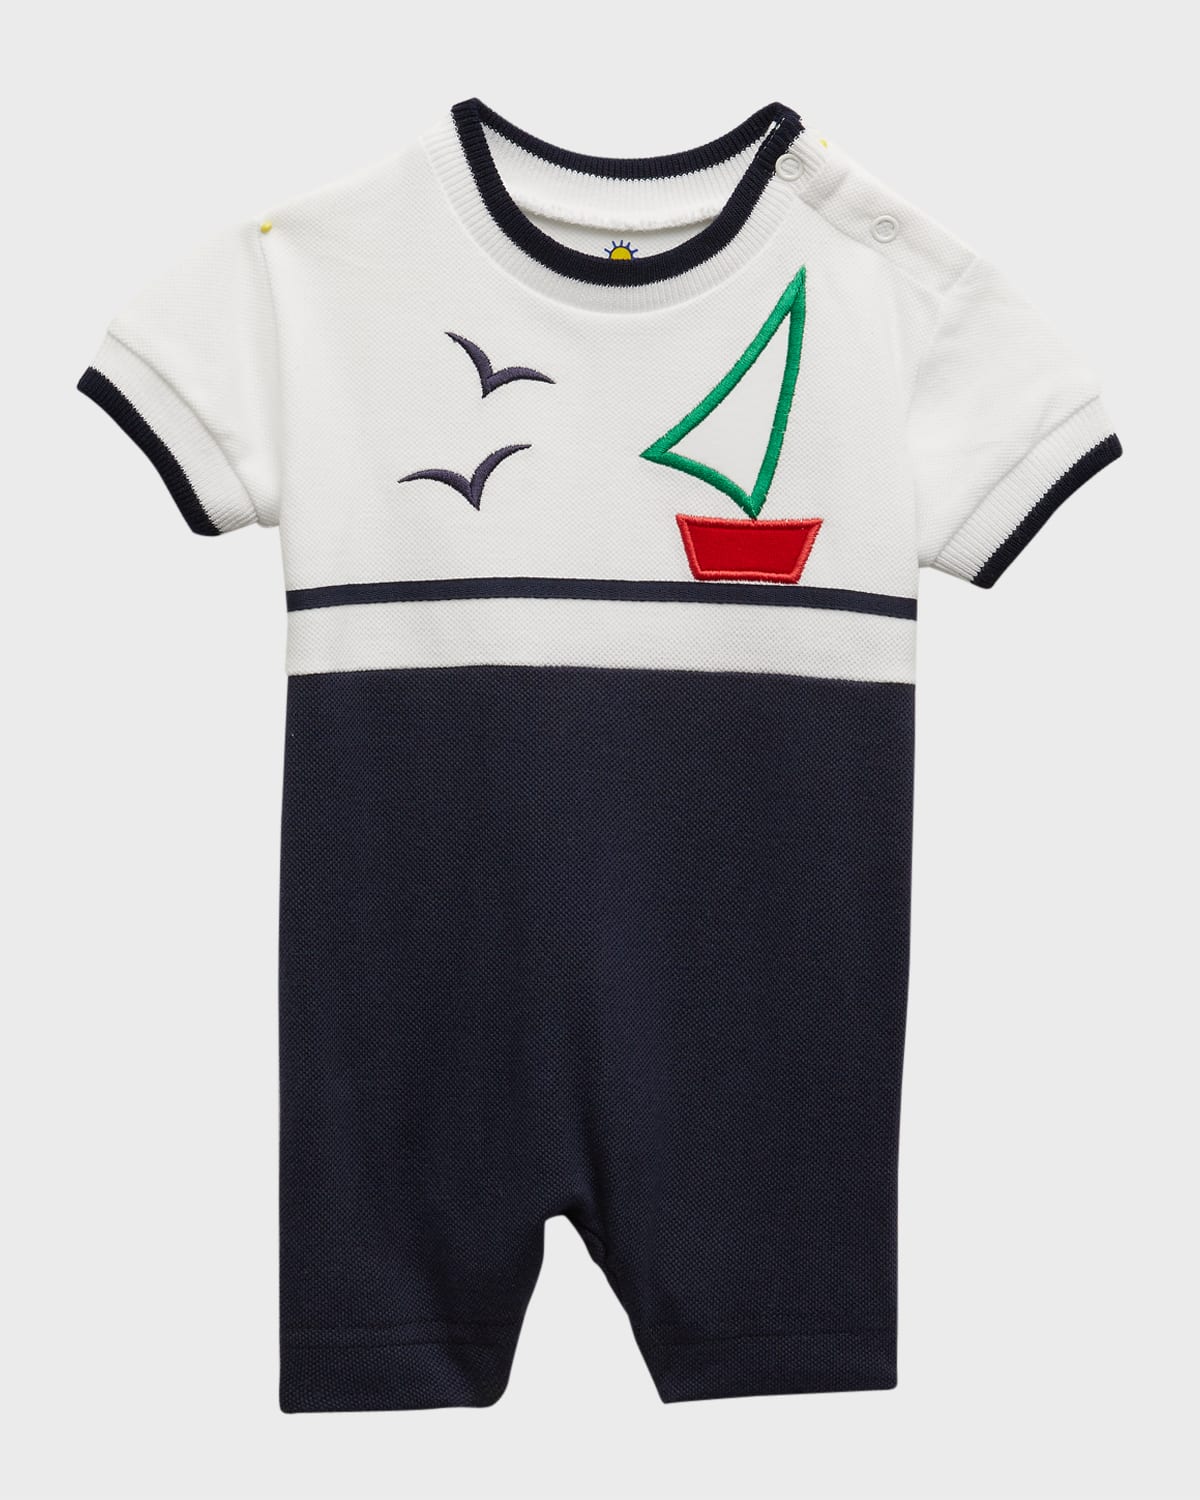 Boy's Embroidered Sailboat Pique Shortall, Size 3M-24M